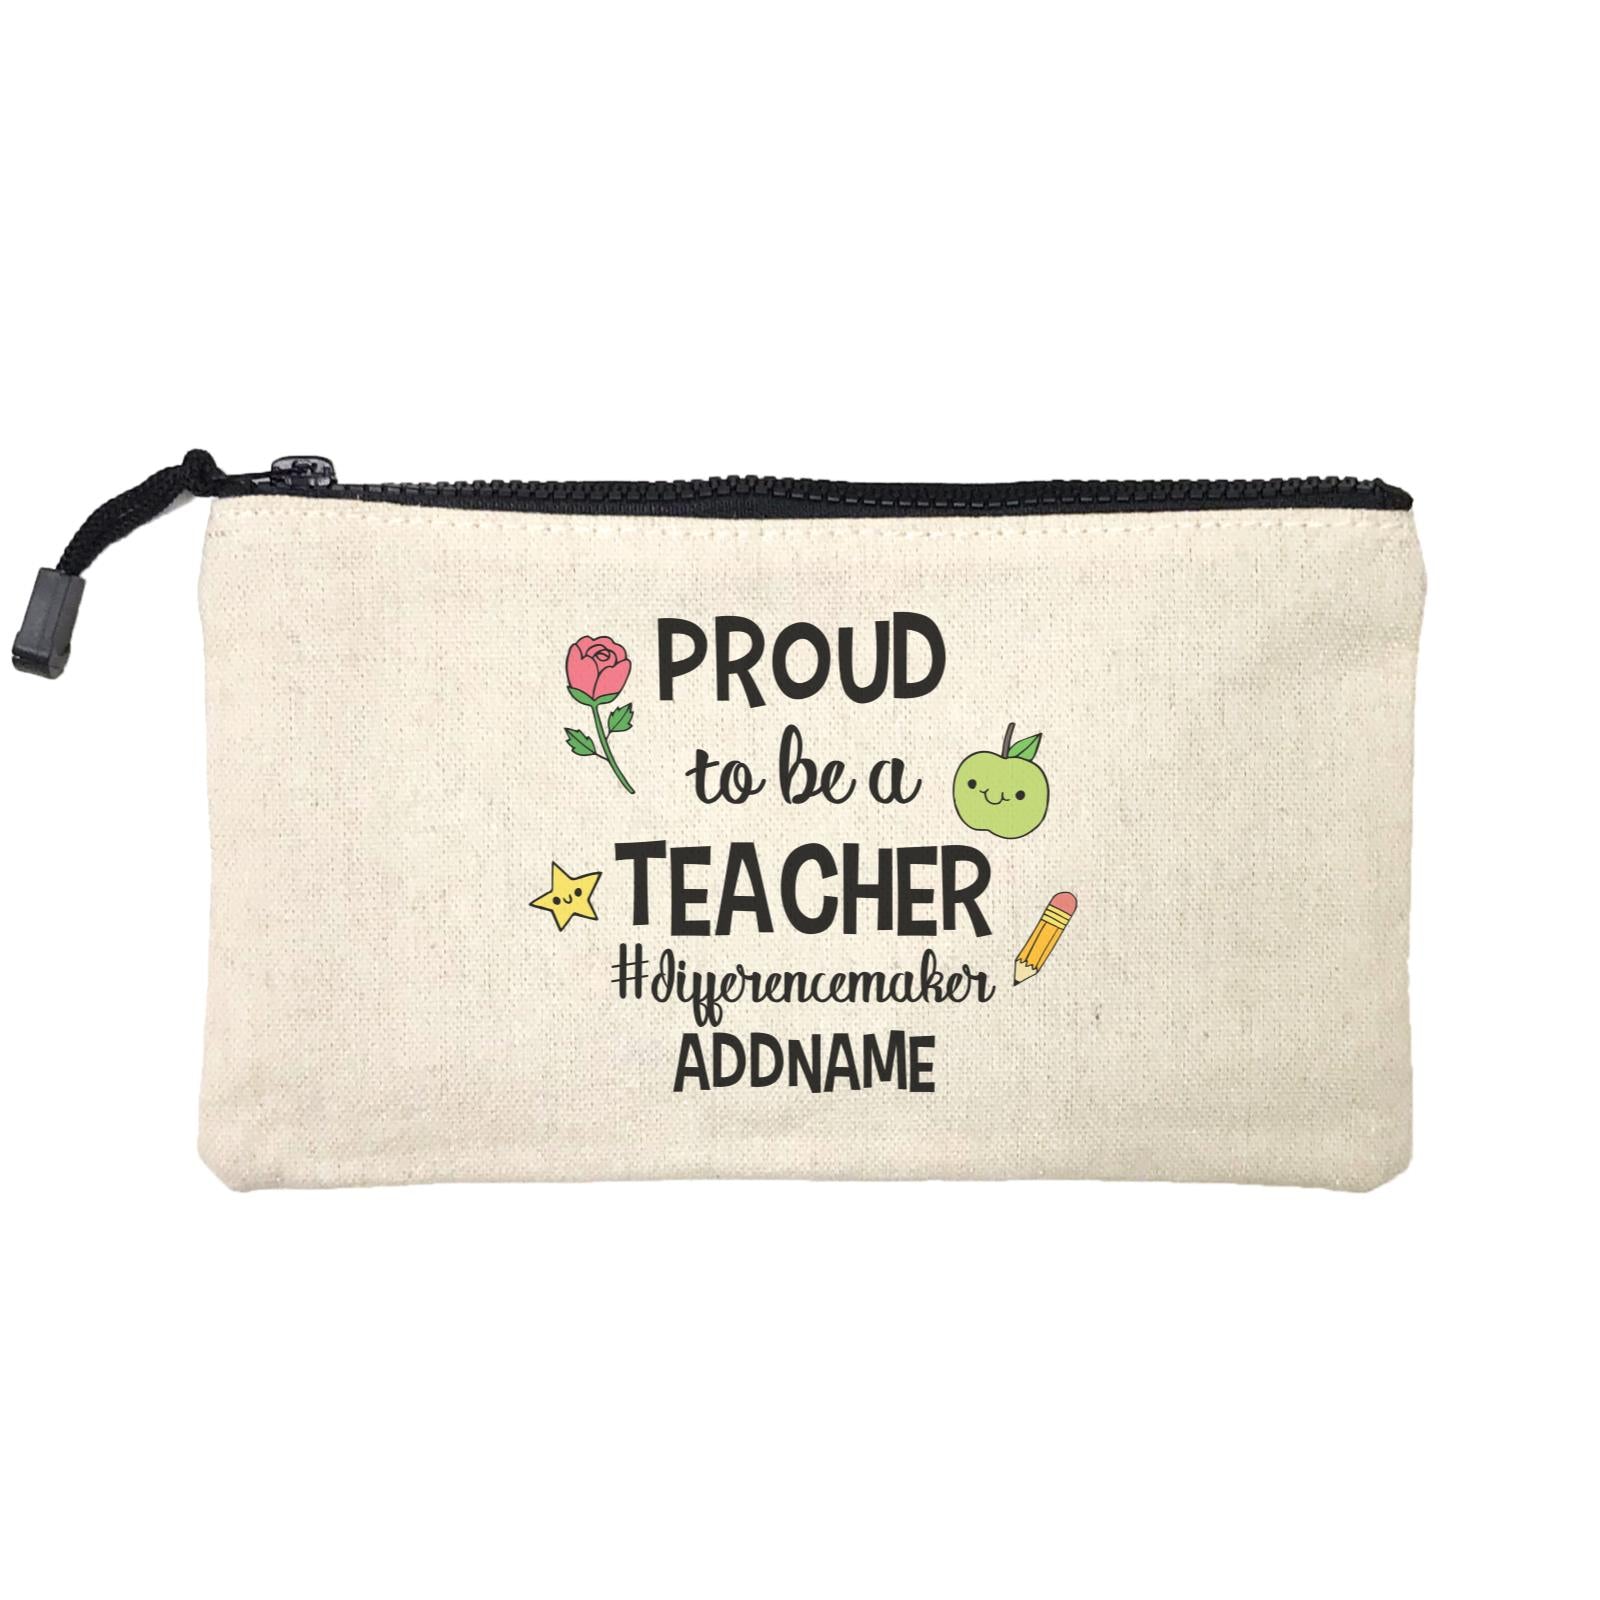 Doodle Series - Proud To Be A Teacher #differencemaker Mini Accessories Stationery Pouch